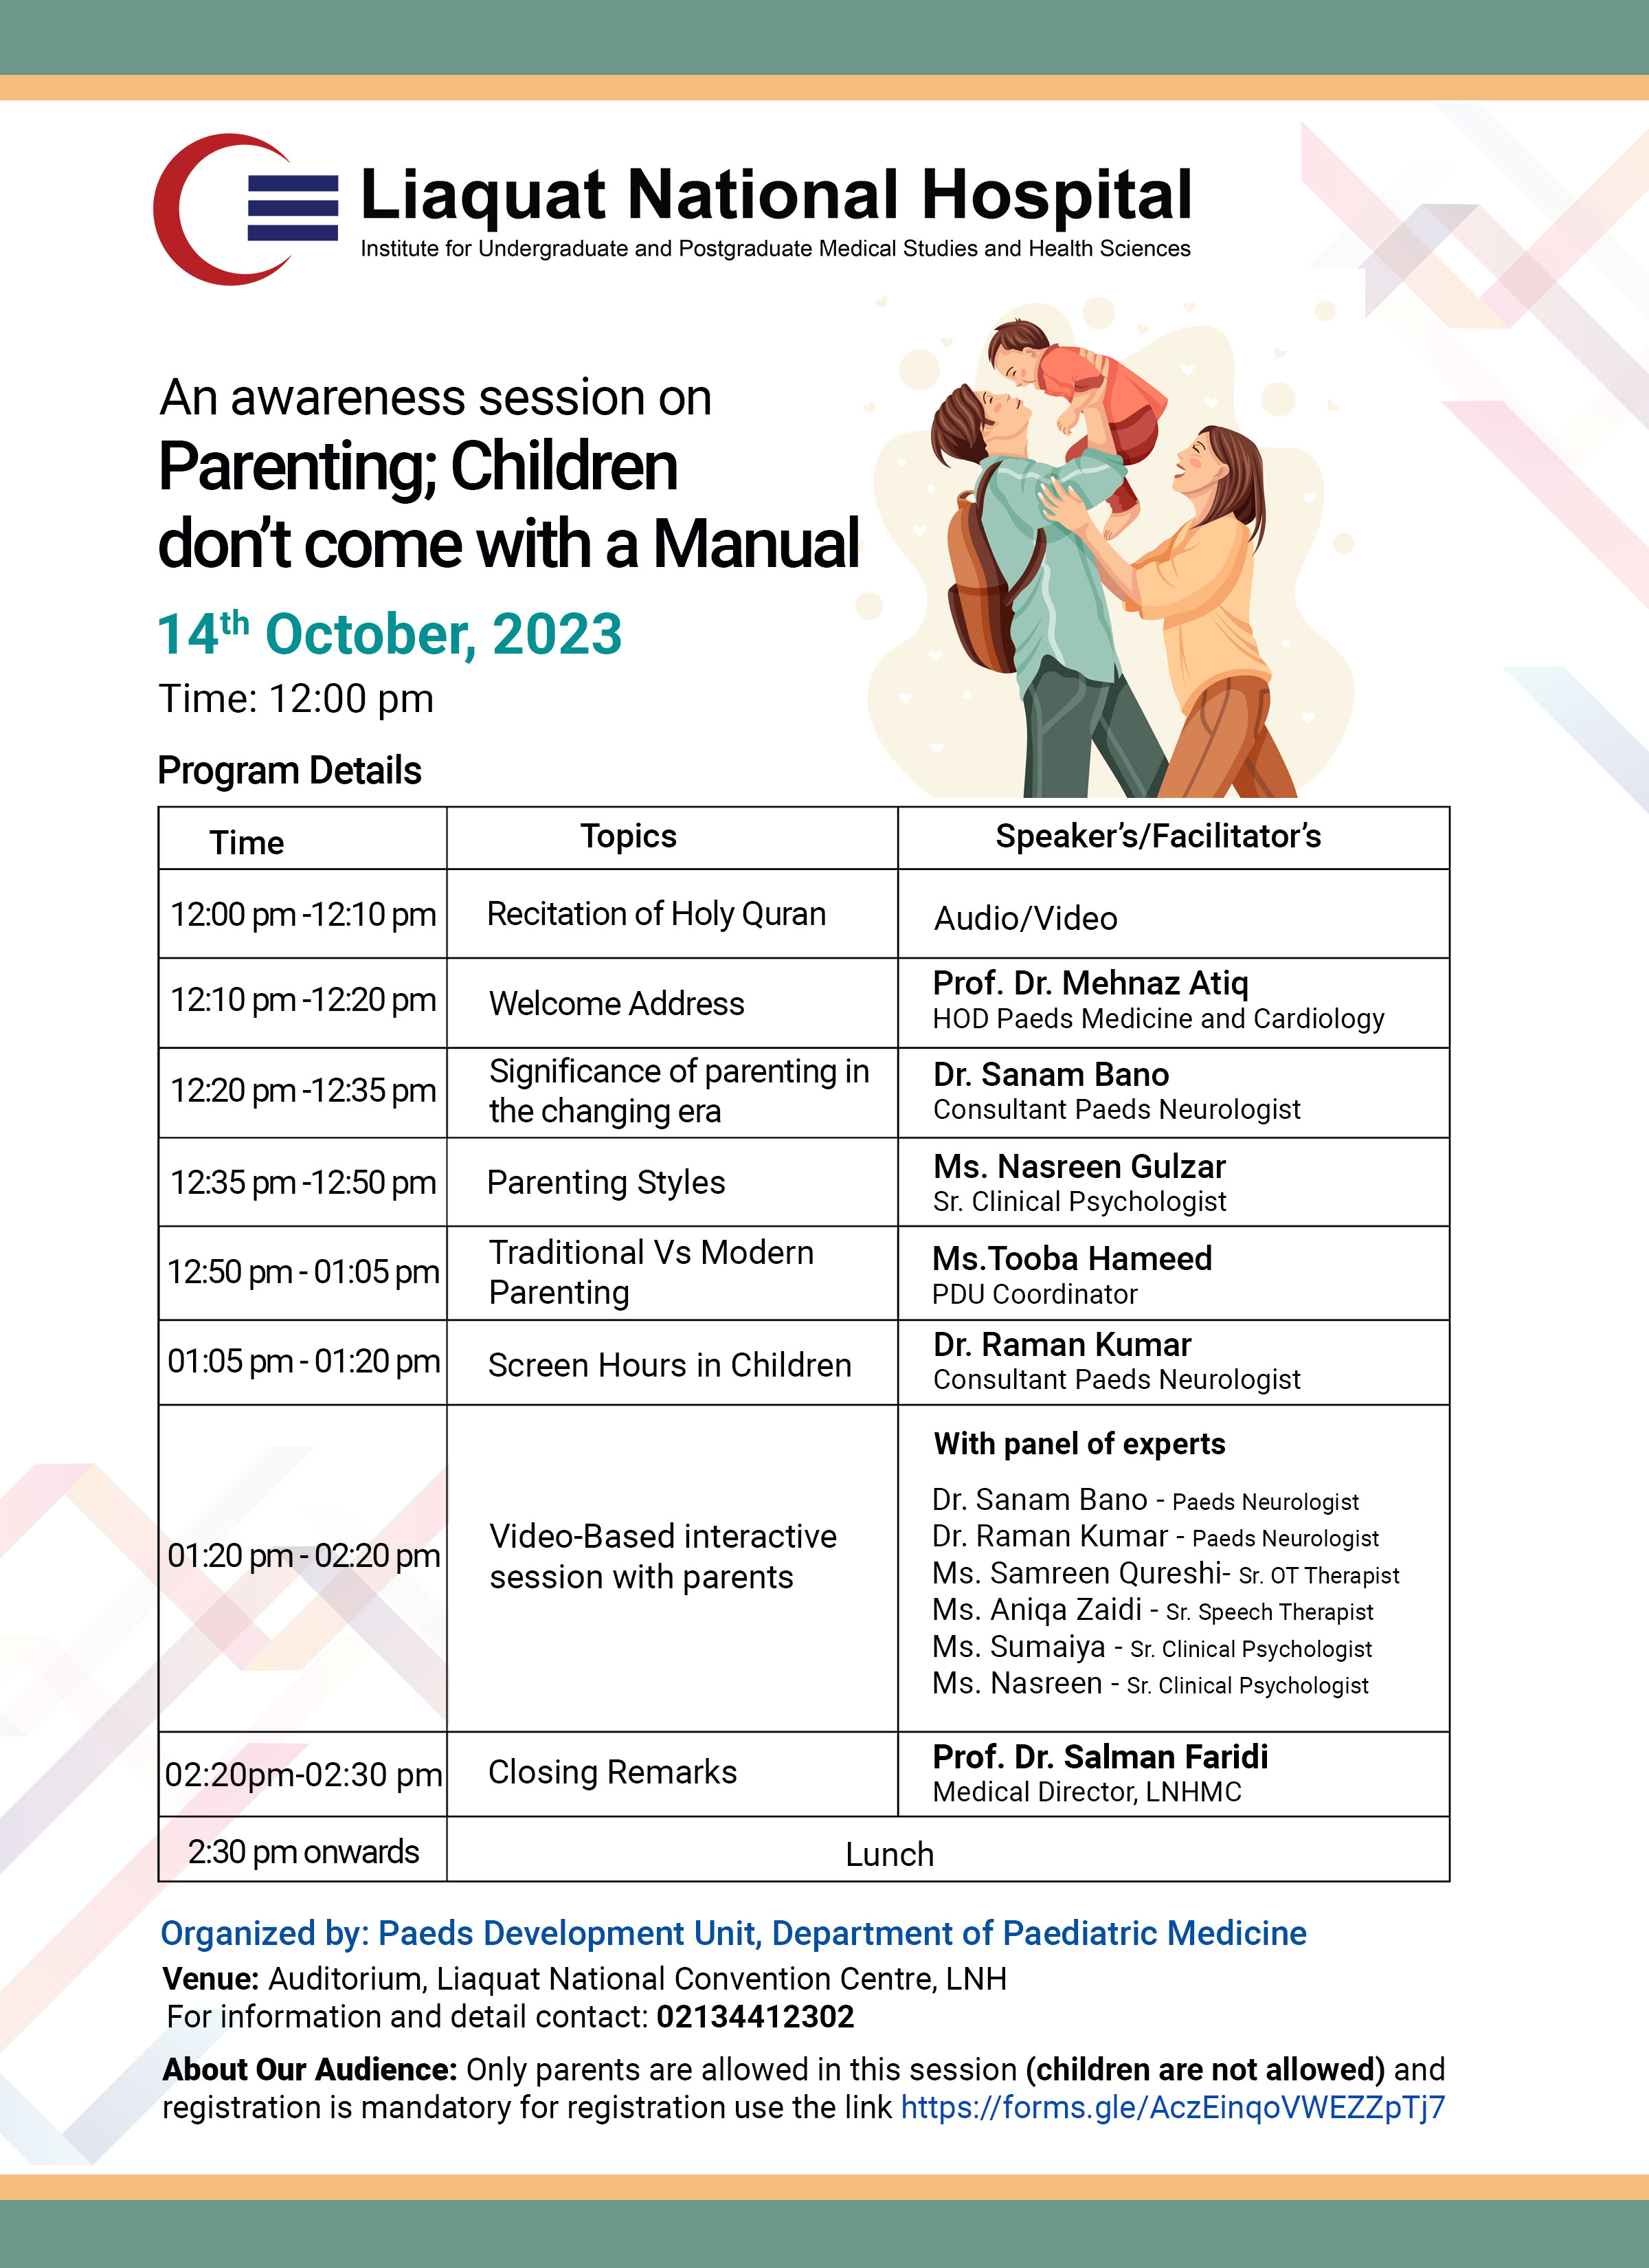 Awareness Session on parenting; Children don’t come with a Manual